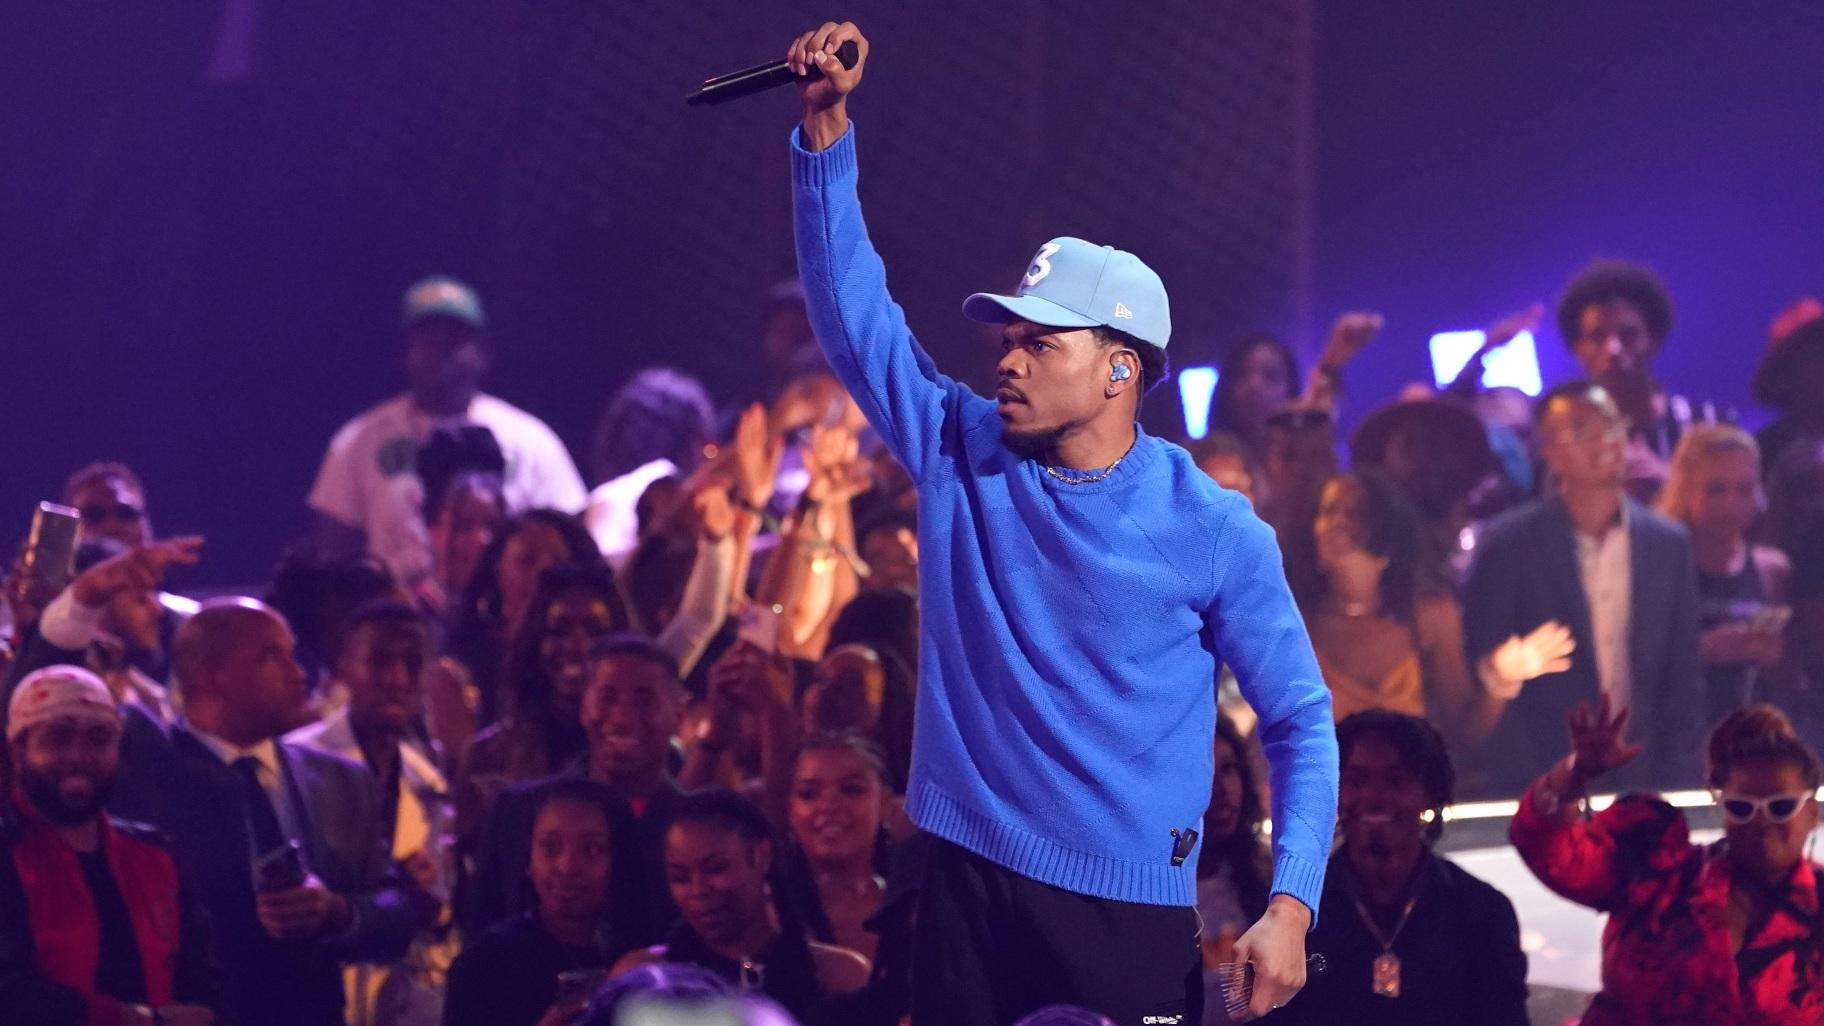 Chance the Rapper performs at the BET Awards on June 26, 2022, at the Microsoft Theater in Los Angeles. (AP Photo / Chris Pizzello, File)